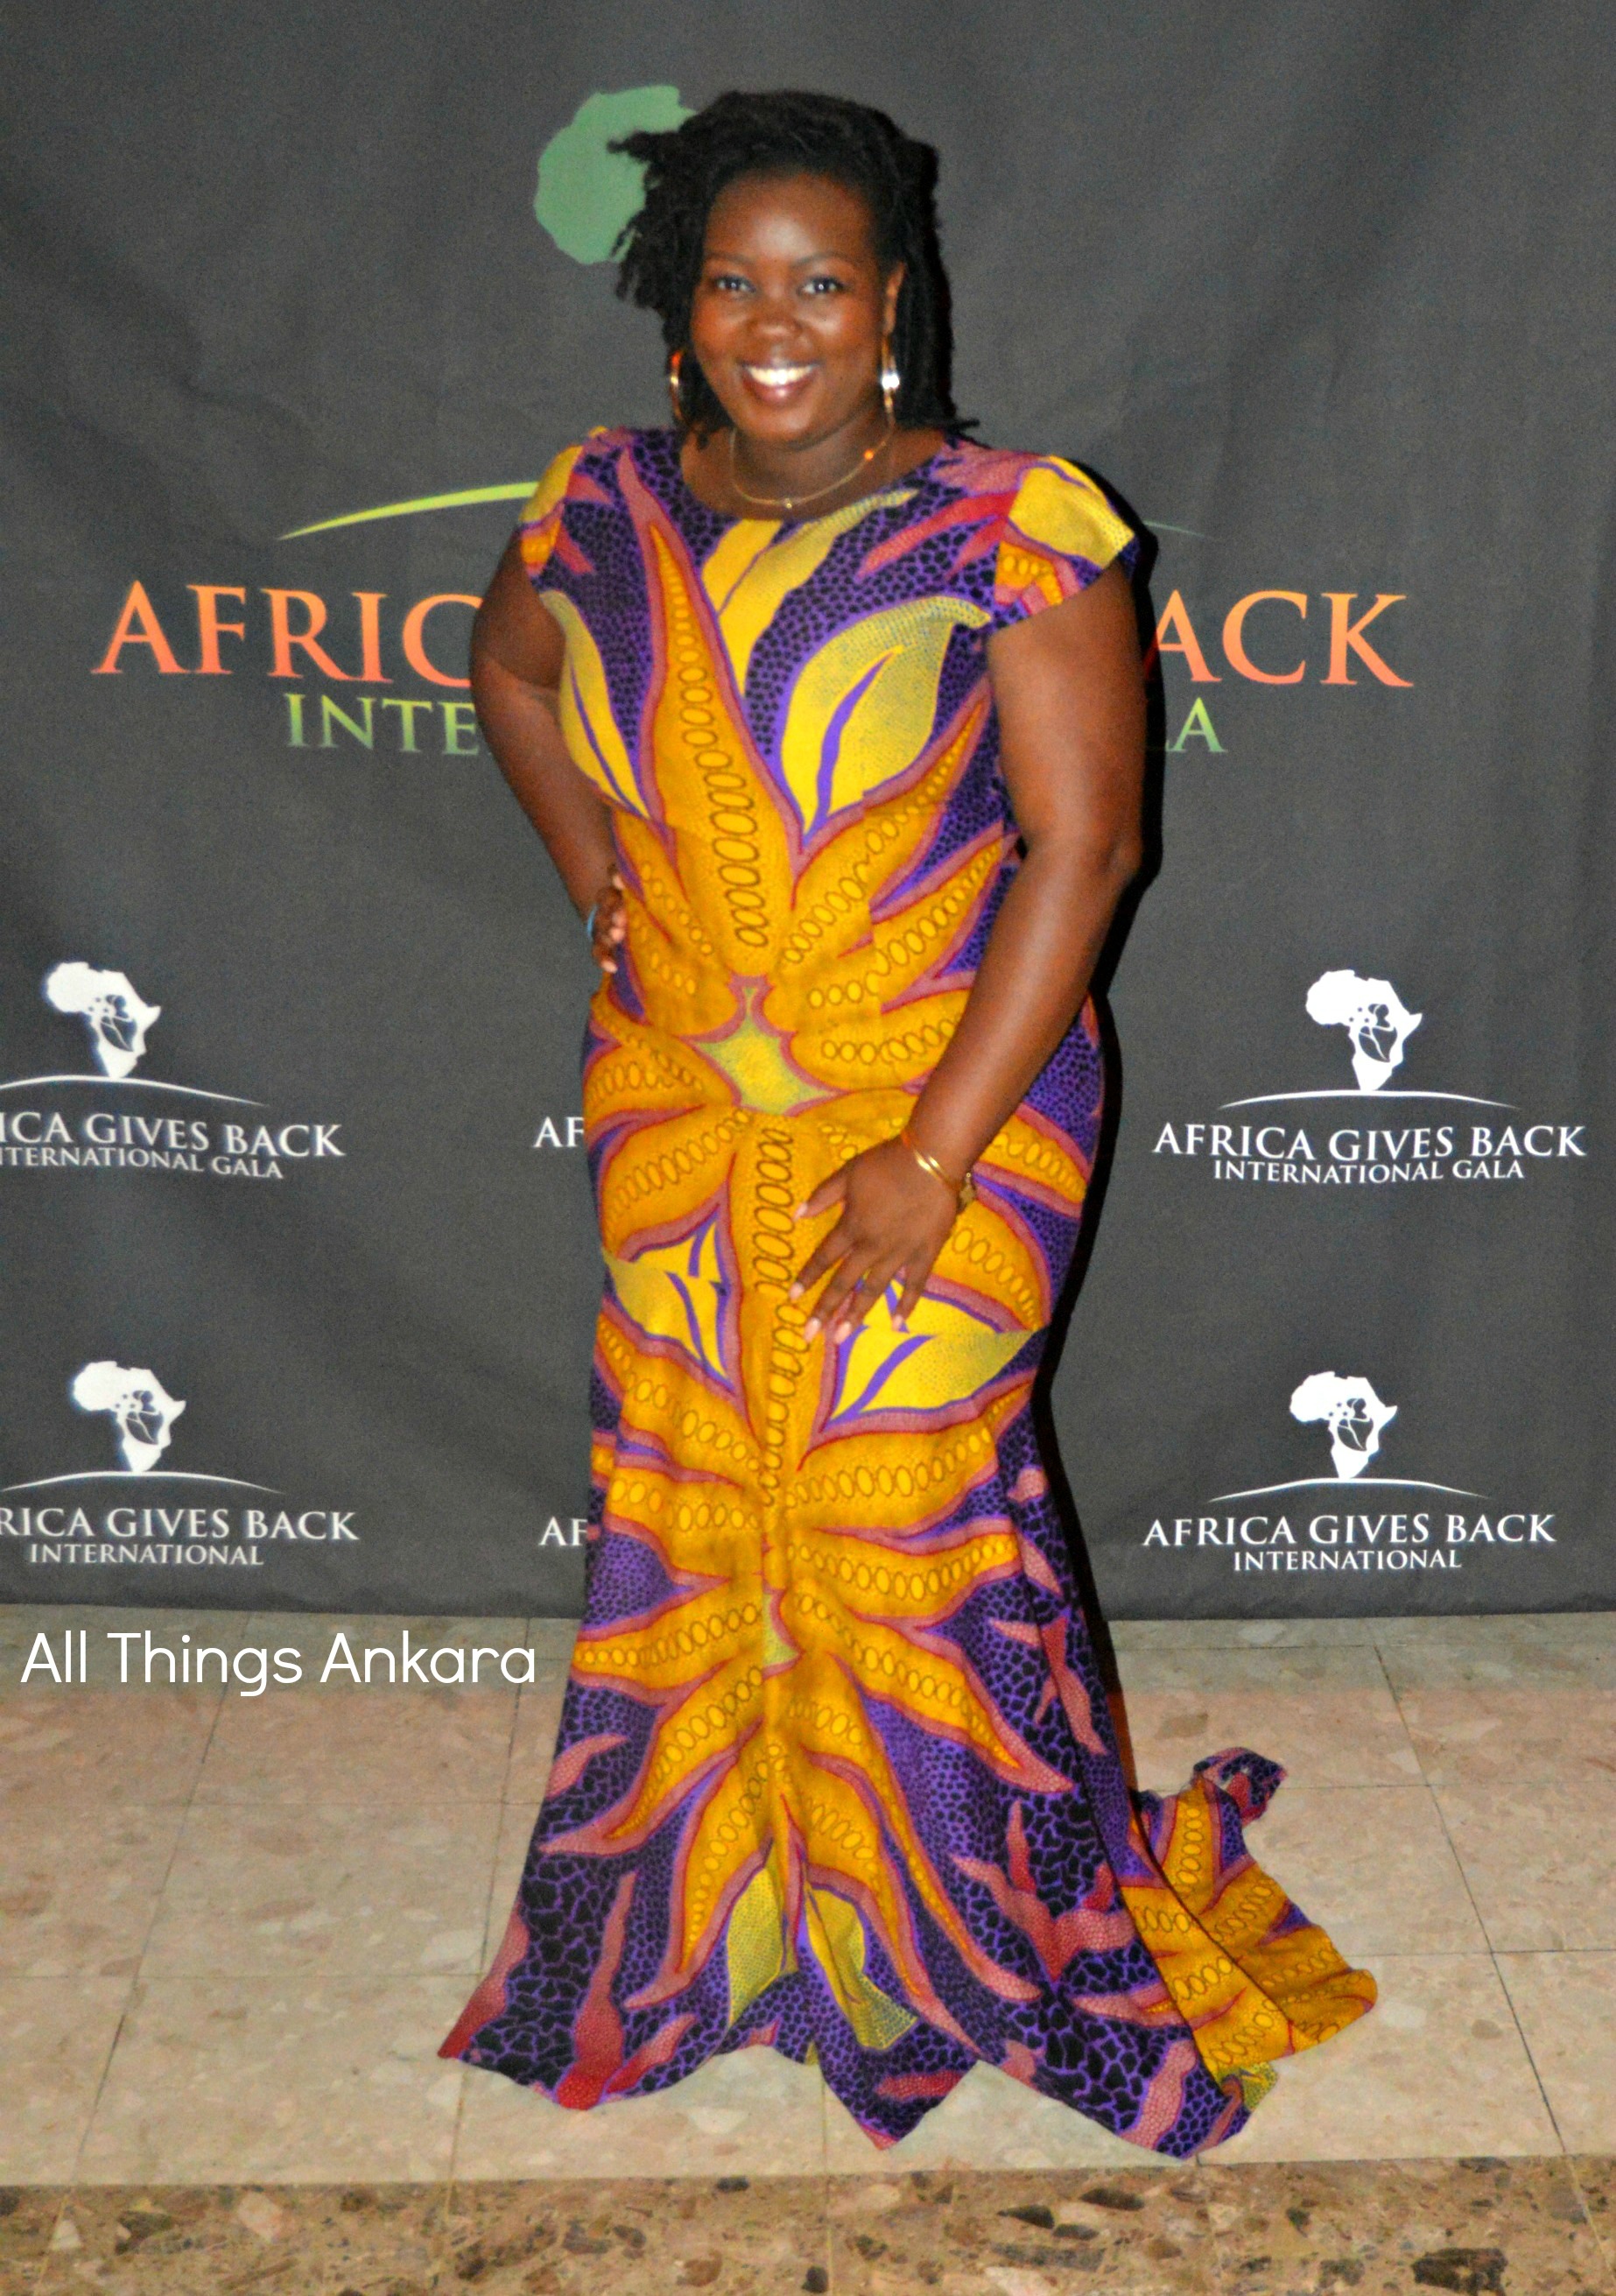 Gala-All Things Ankara's Best Dressed Women at Africa Gives Back International Gala 2016 13